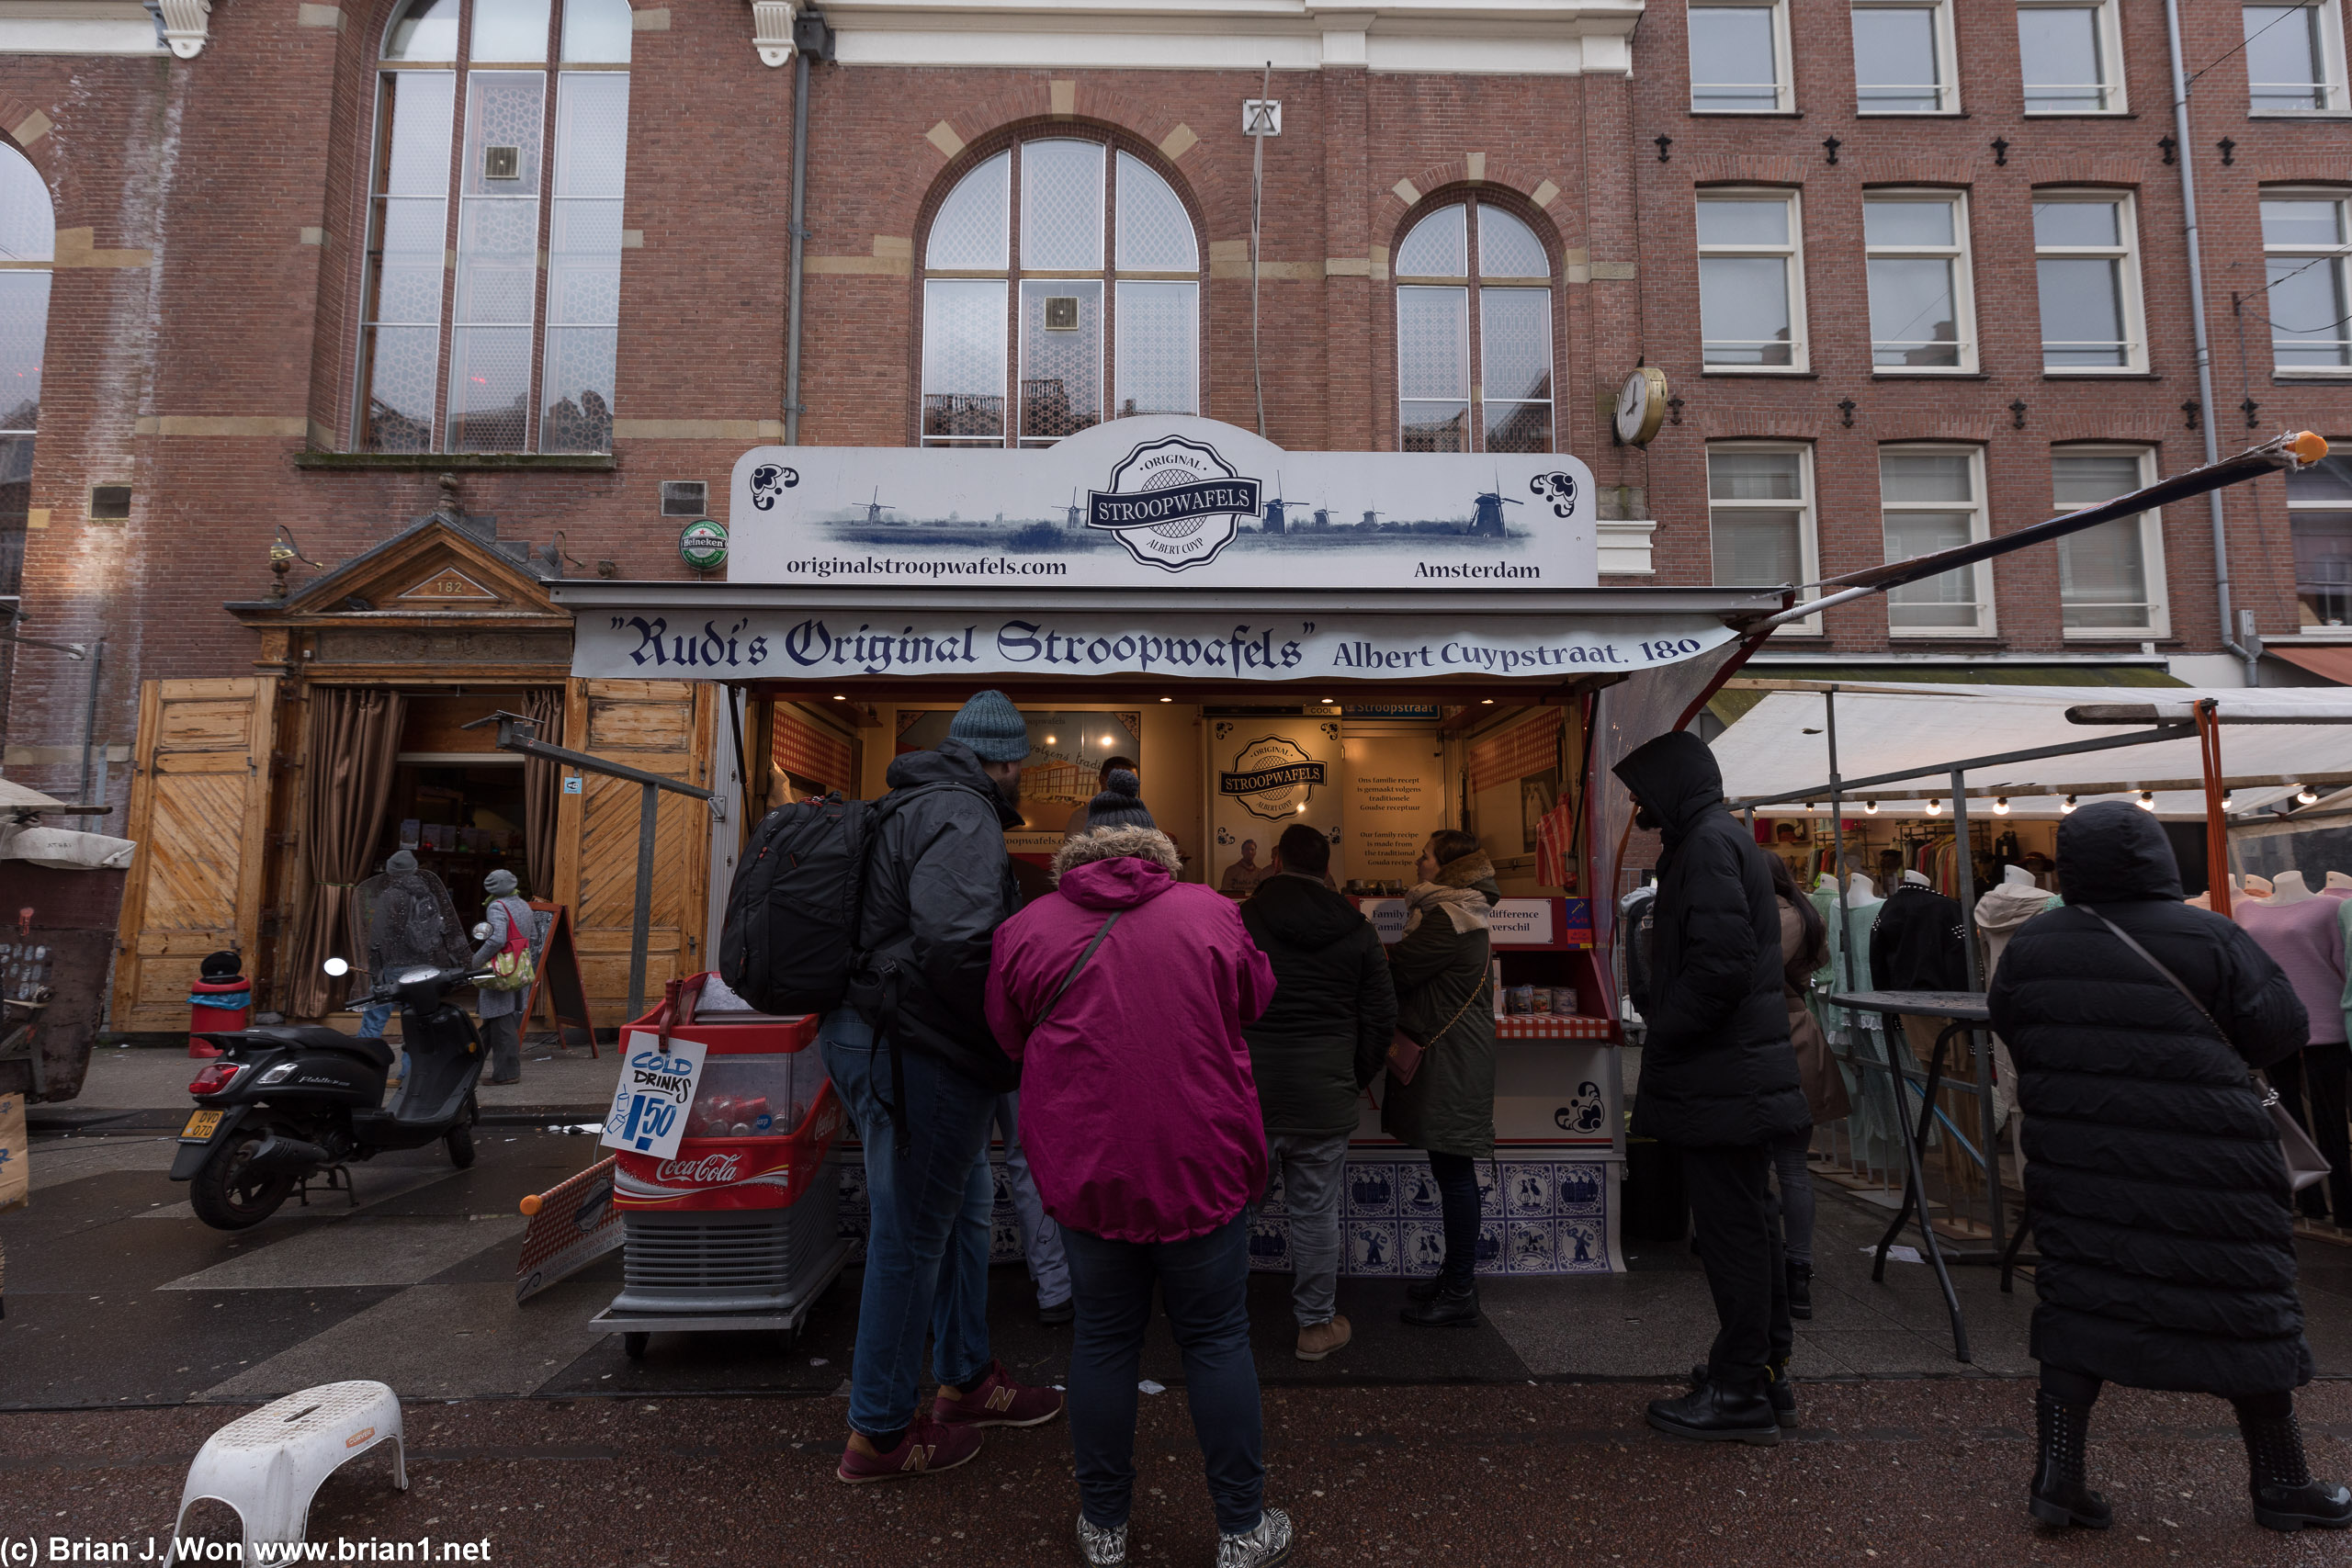 One of many stroopwafel vendors.